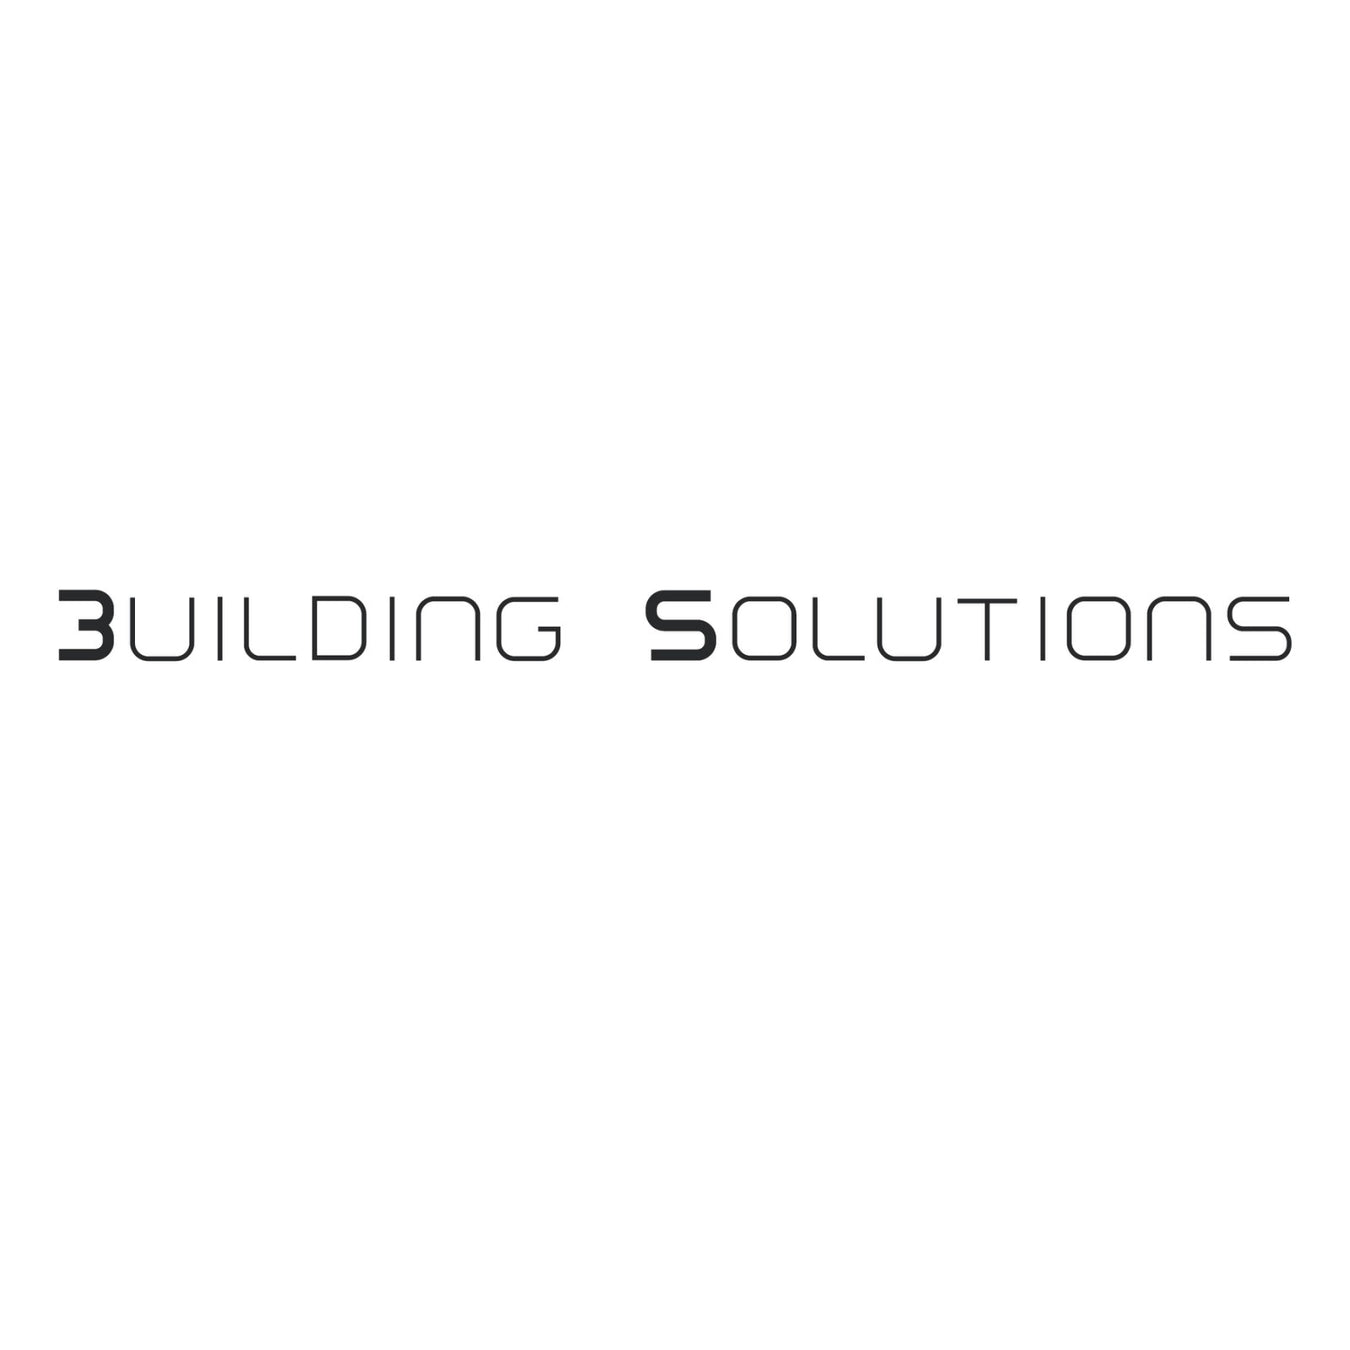 Building Solutions